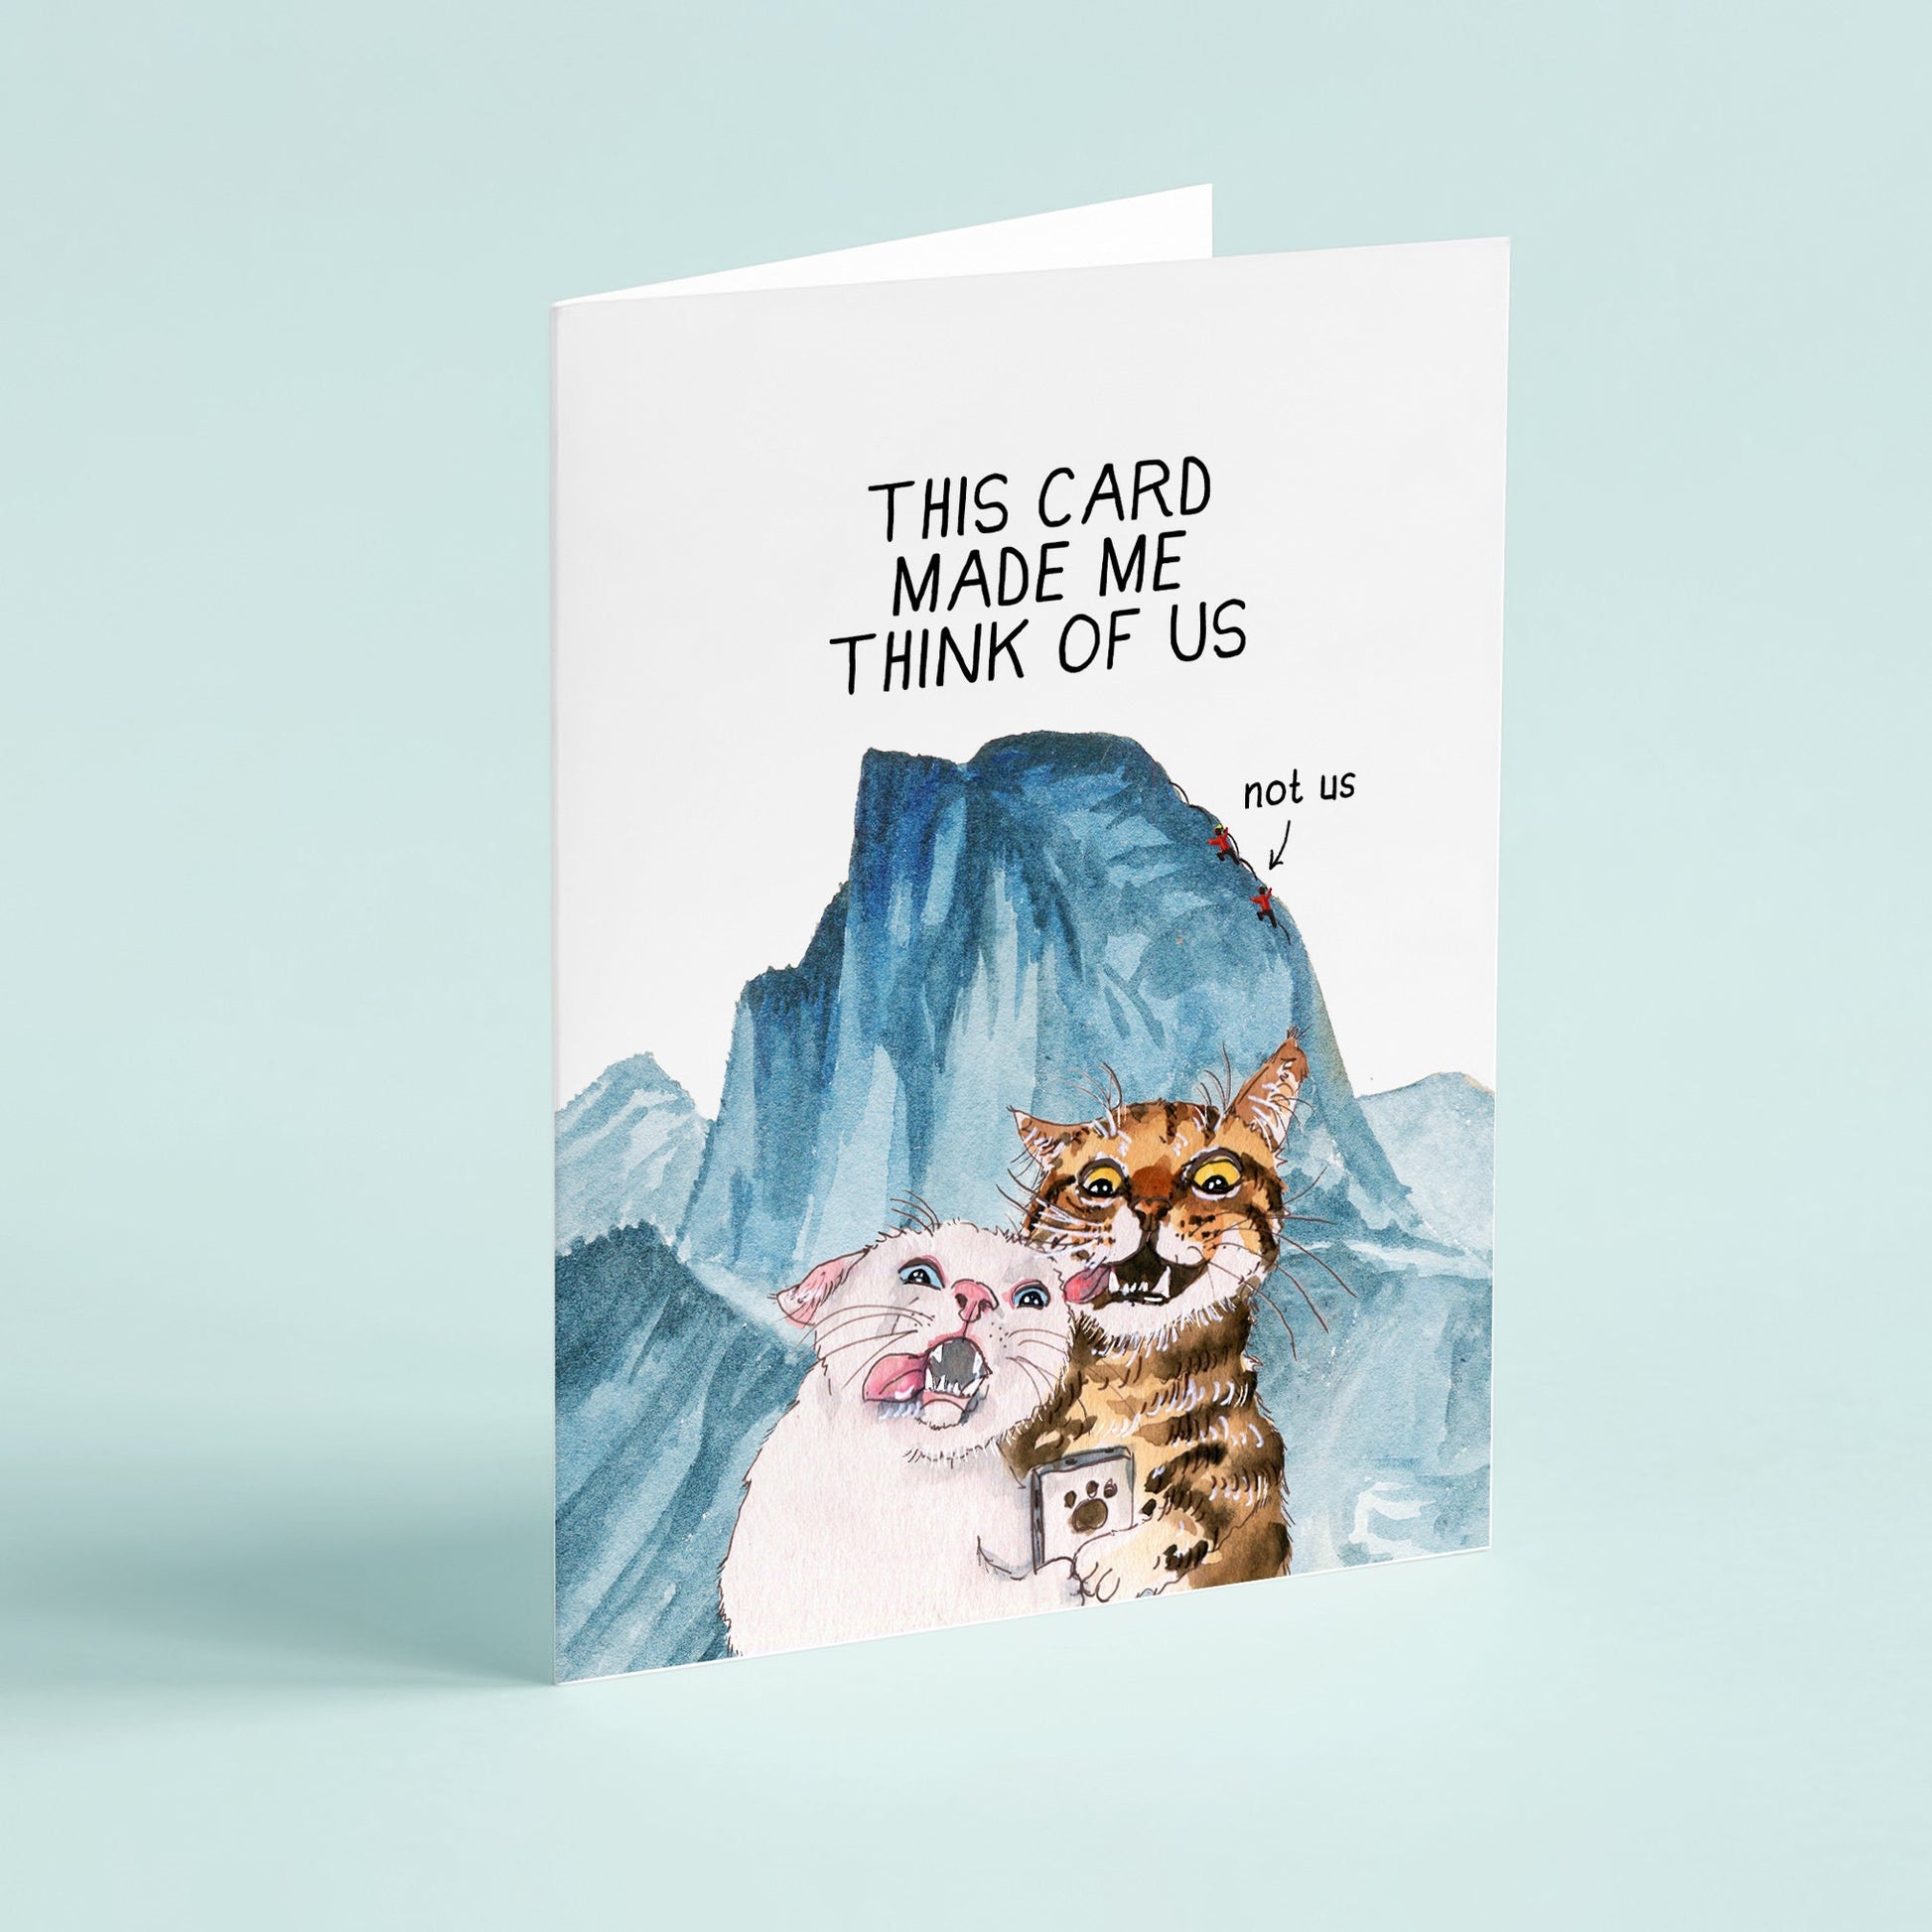 Adventure Funny Anniversary Card For Boyfriend - Funny Birthday Card For Best Friend - Yosemite National Park Travel Gifts For Parents